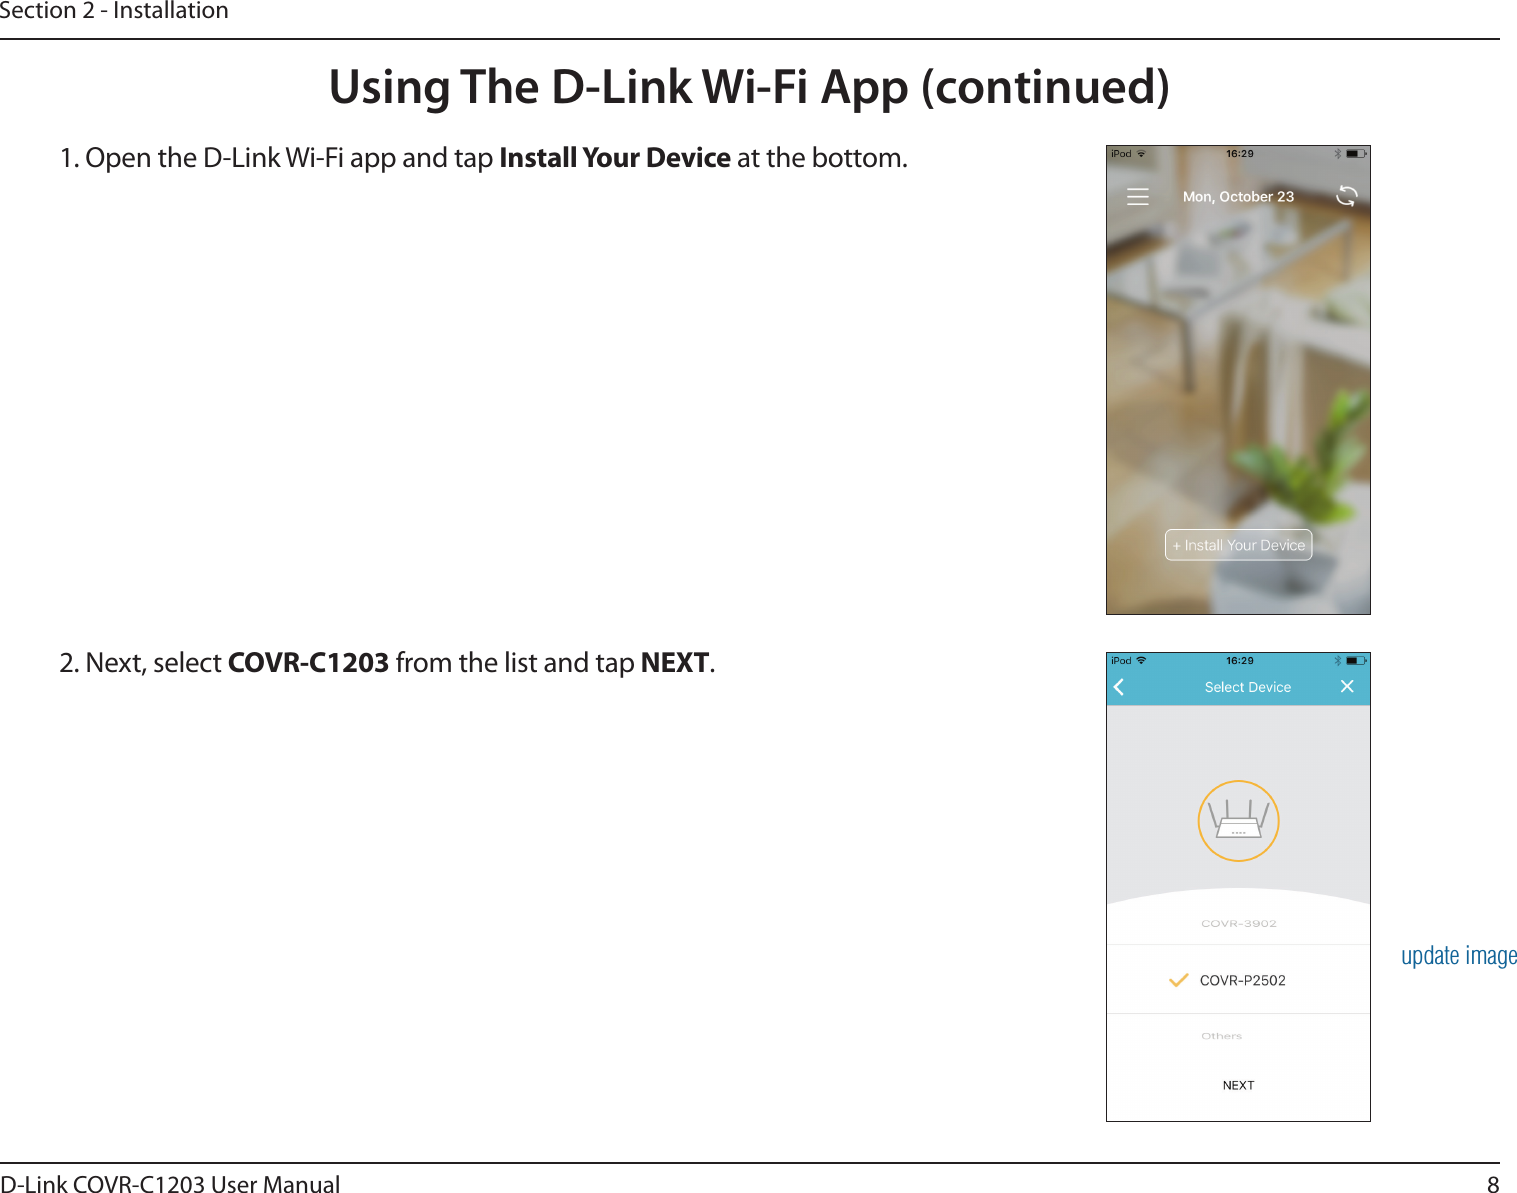 8D-Link COVR-C1203 User ManualSection 2 - InstallationUsing The D-Link Wi-Fi App (continued)1. Open the D-Link Wi-Fi app and tap Install Your Device at the bottom.2. Next, select COVR-C1203 from the list and tap NEXT.update image